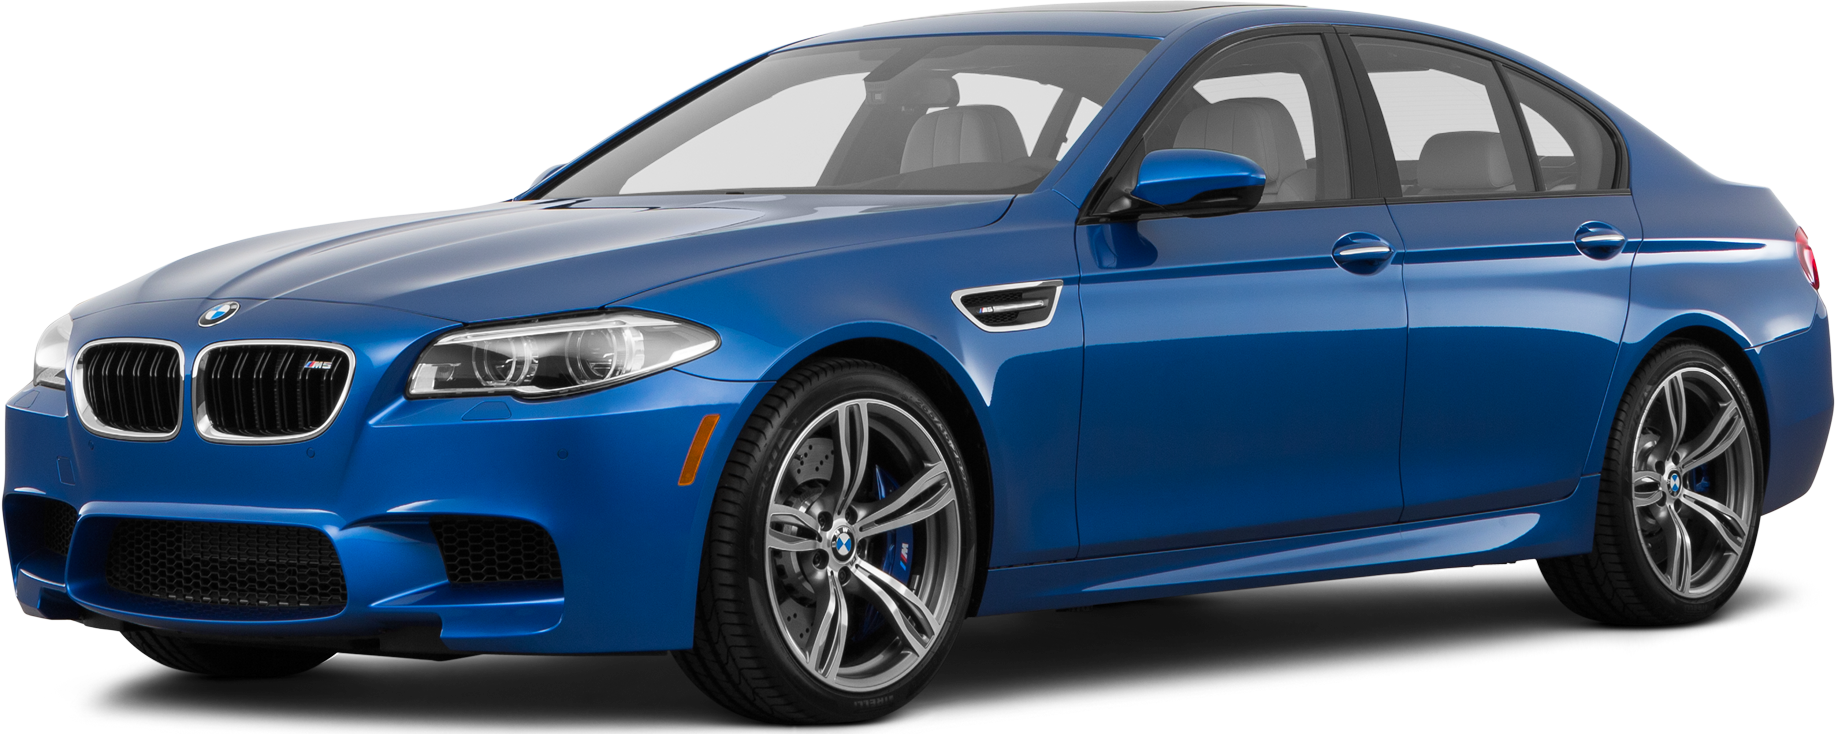 2016 BMW M5 Price, Value, Ratings & Reviews